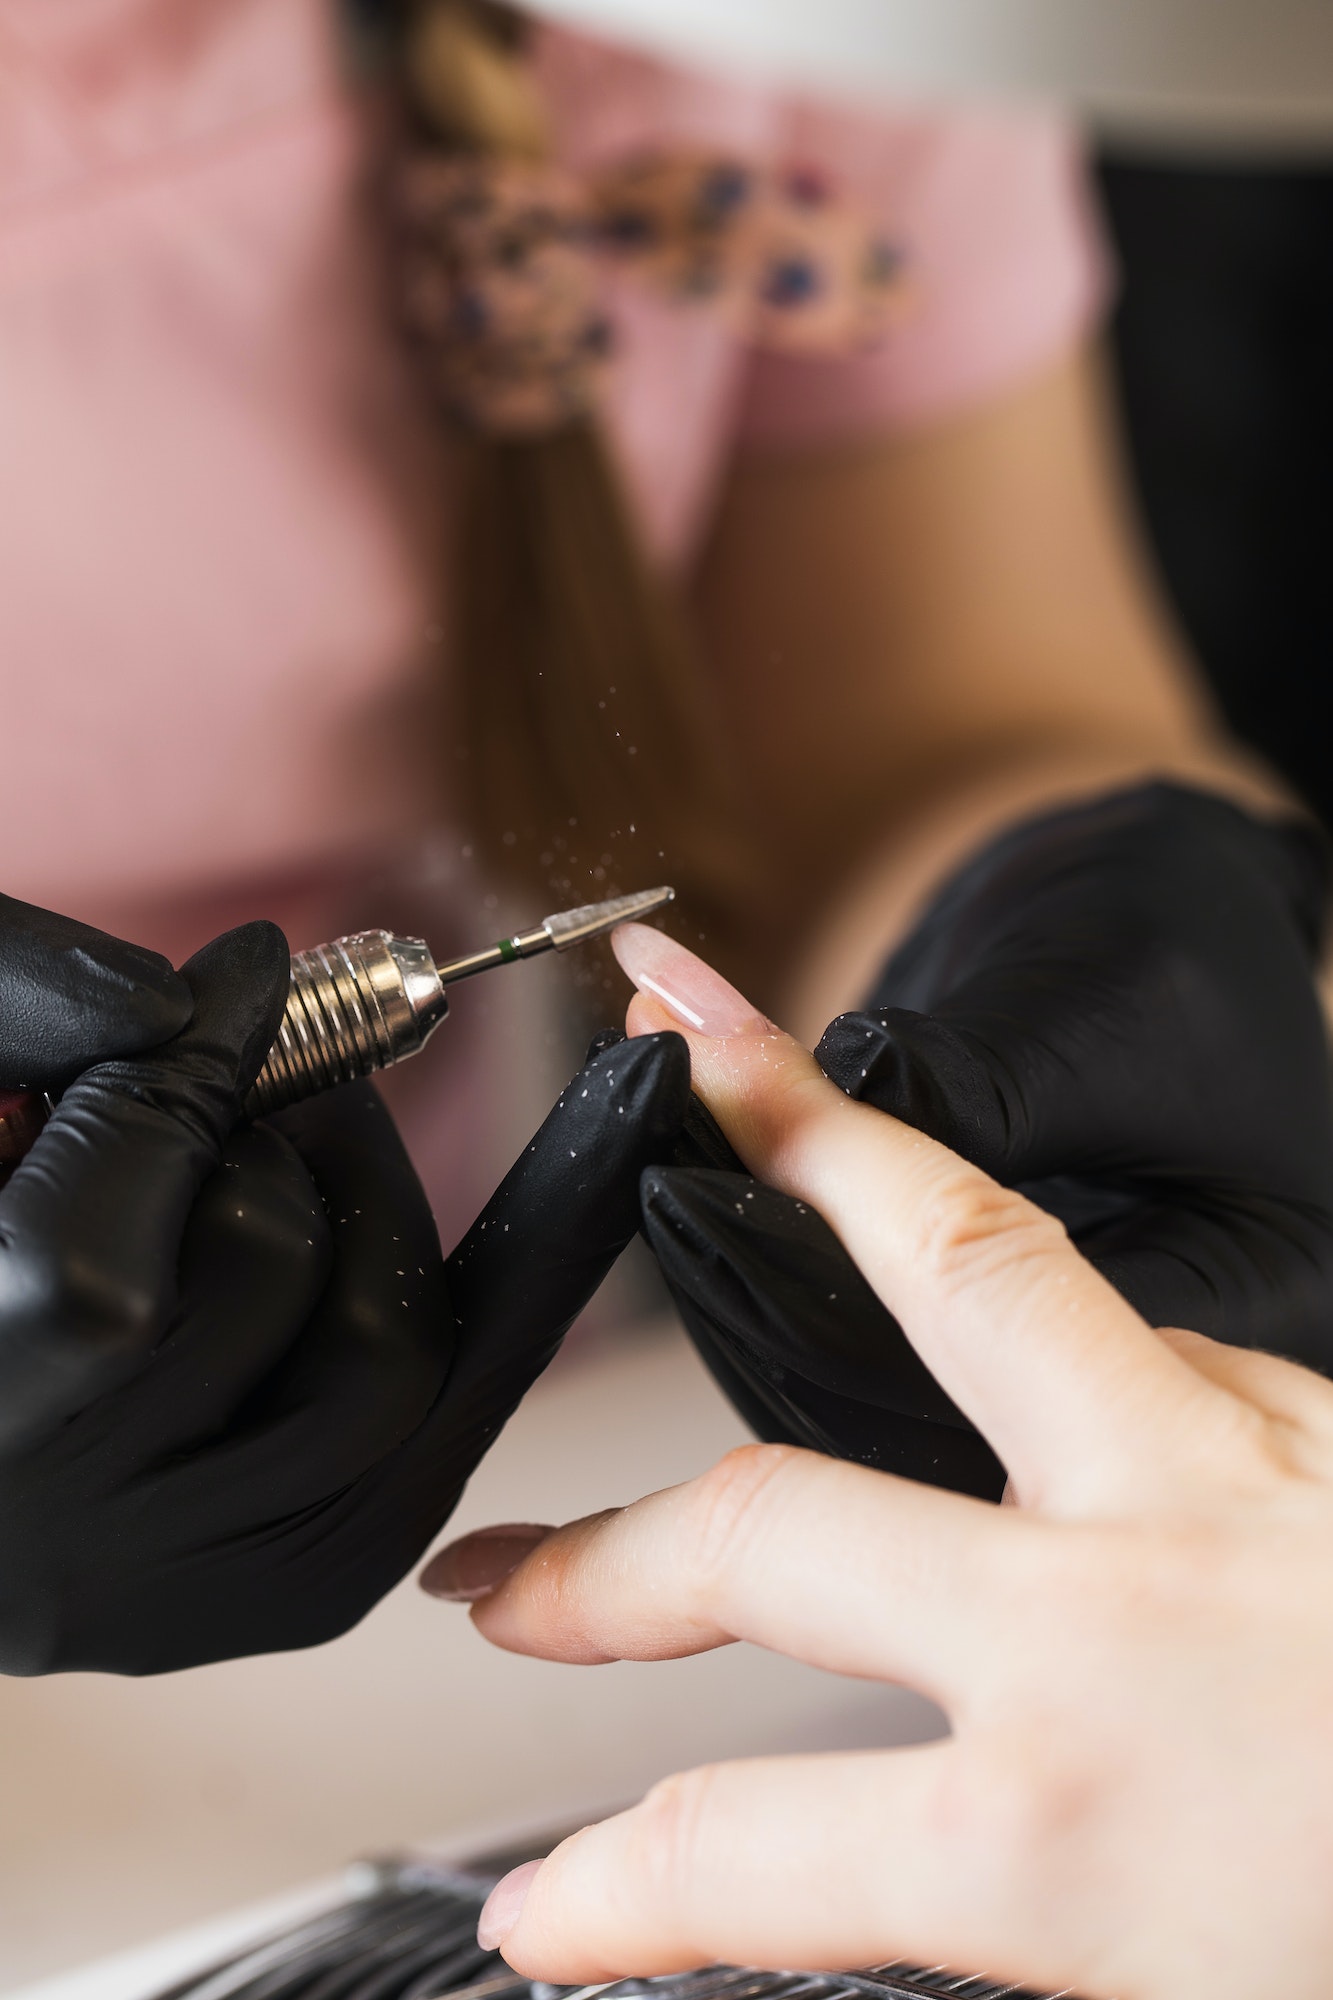 A manicurist removes gel polish from nails using a milling cutter. Hardware manicure close-up.